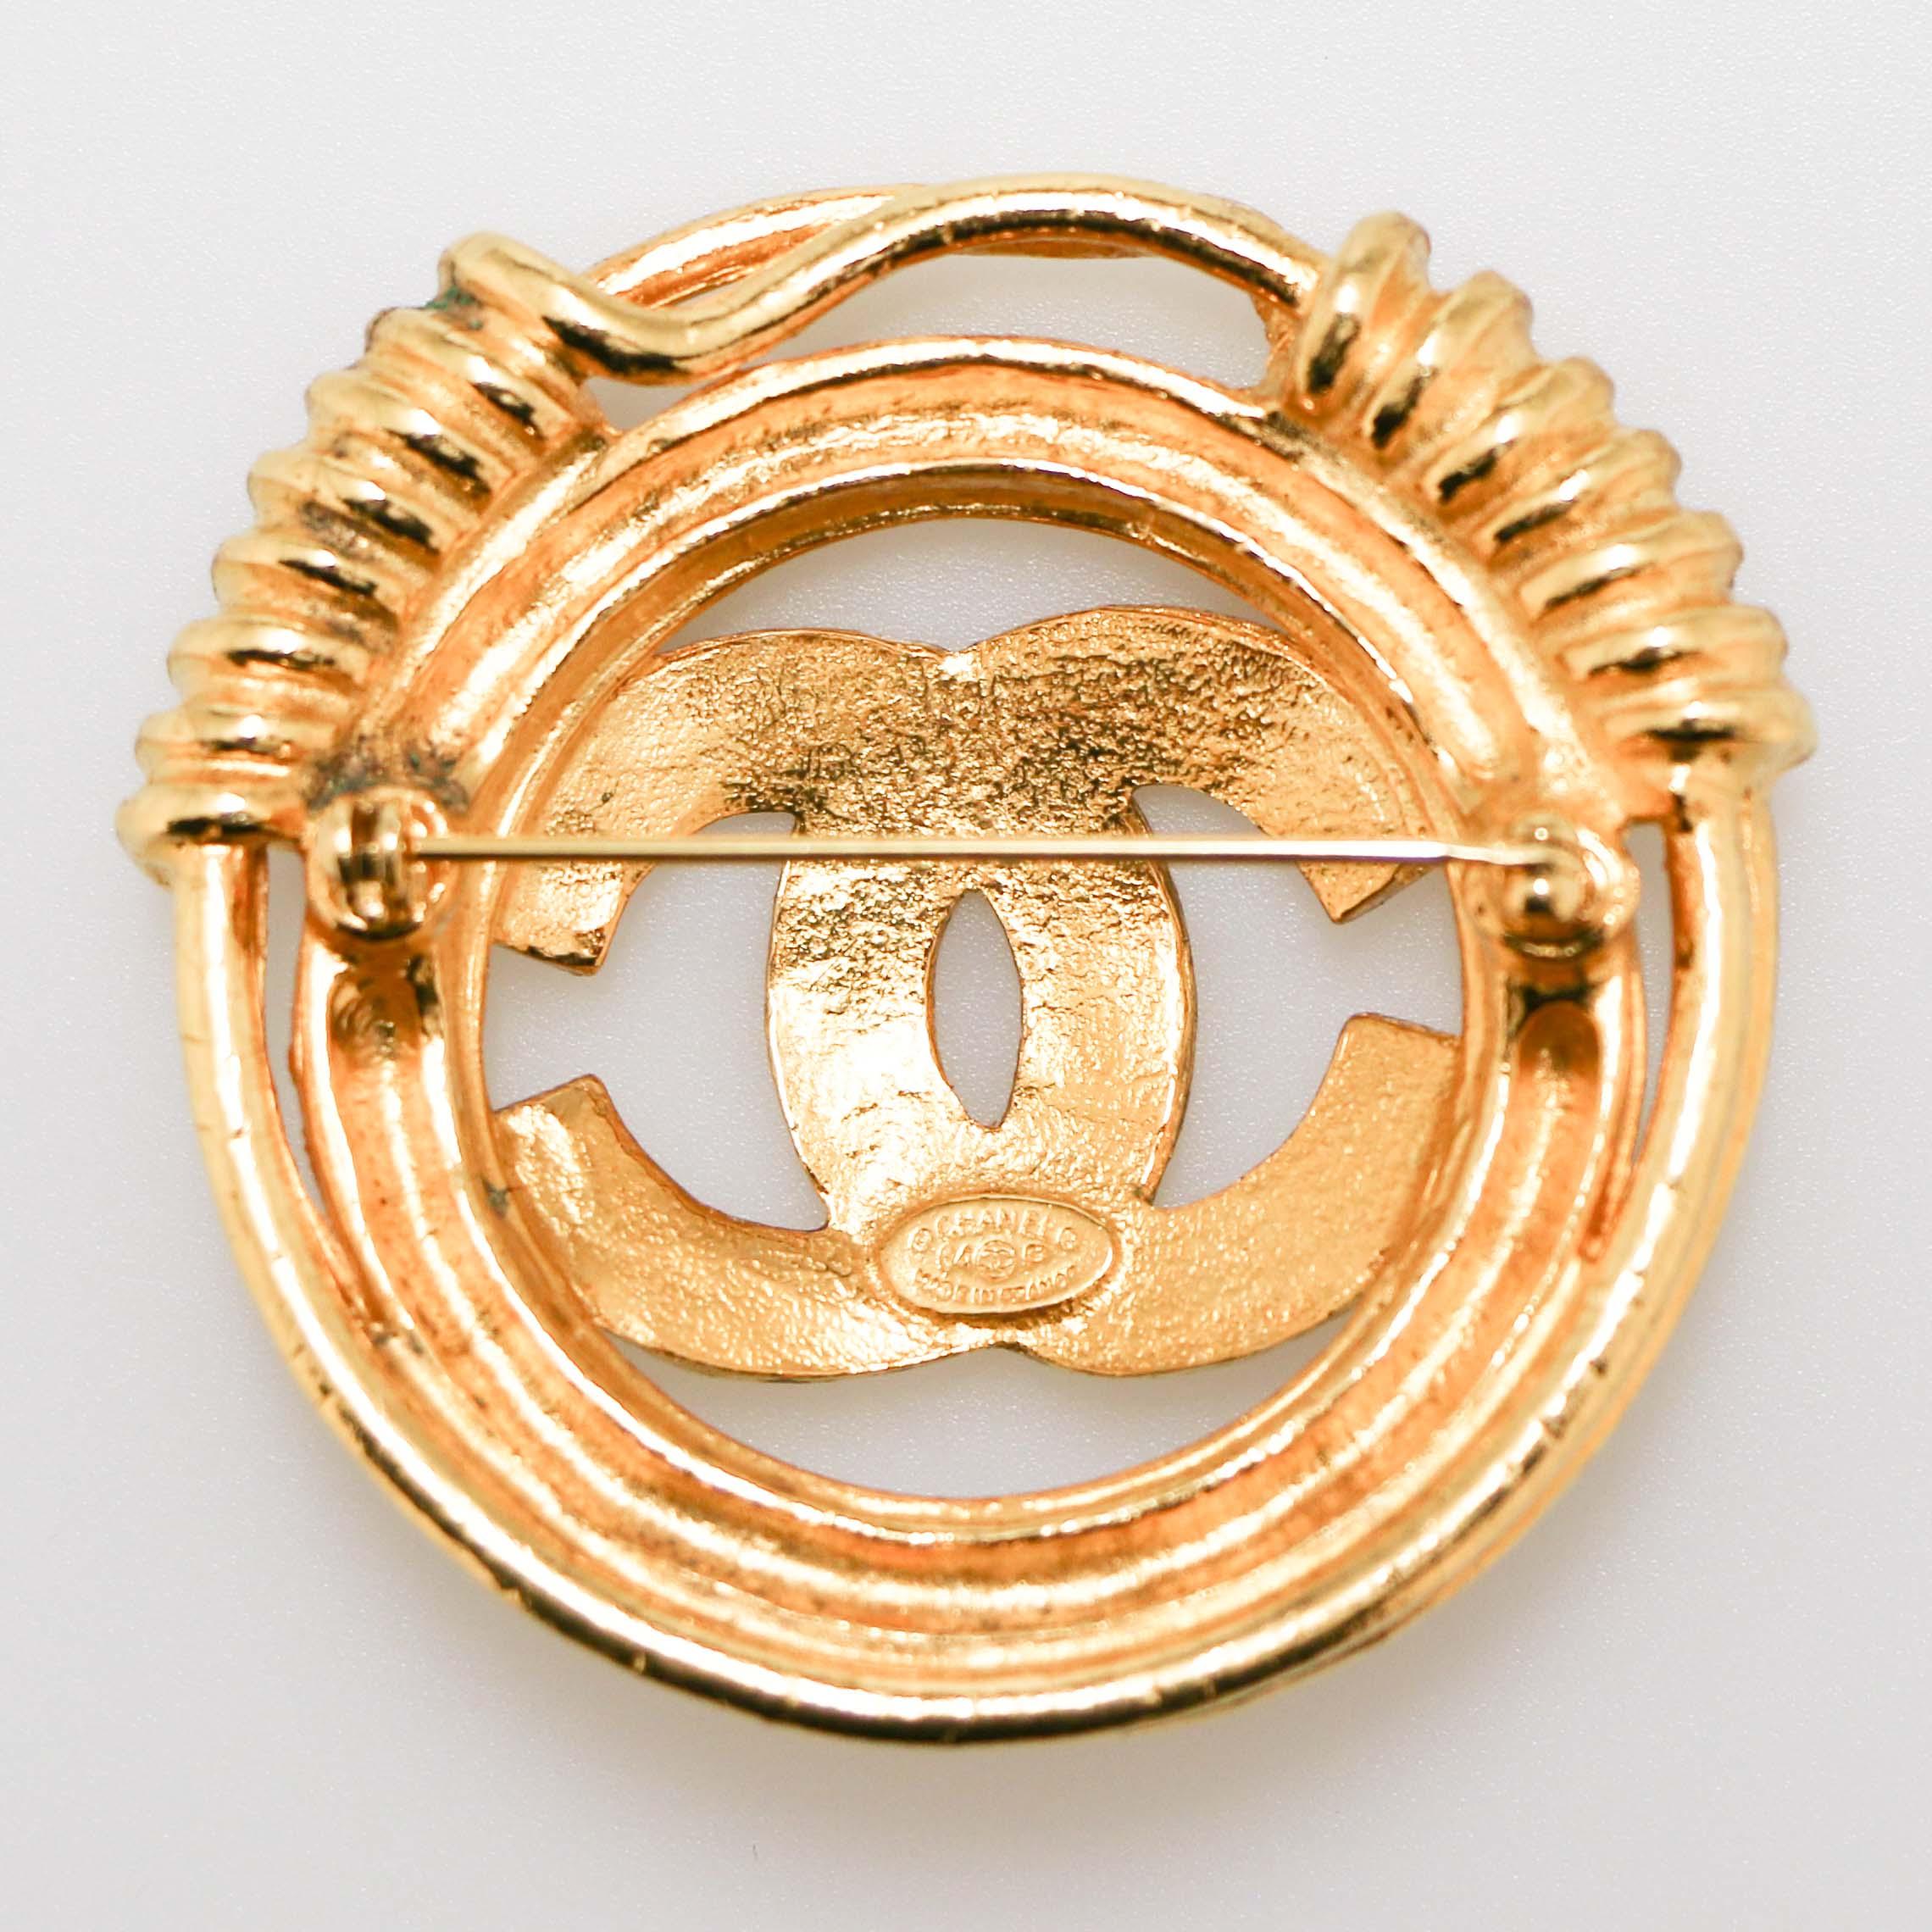 Beautiful vintage Chanel Brooch from 1994 ! A stunning brooch to add to your outfit !

Condition : very good
Made in France
Materials : gold plated metal
Color : gold
Hardware : golden metal
Stamp : yes
Year: spring 1994
Details : big vintage CC in